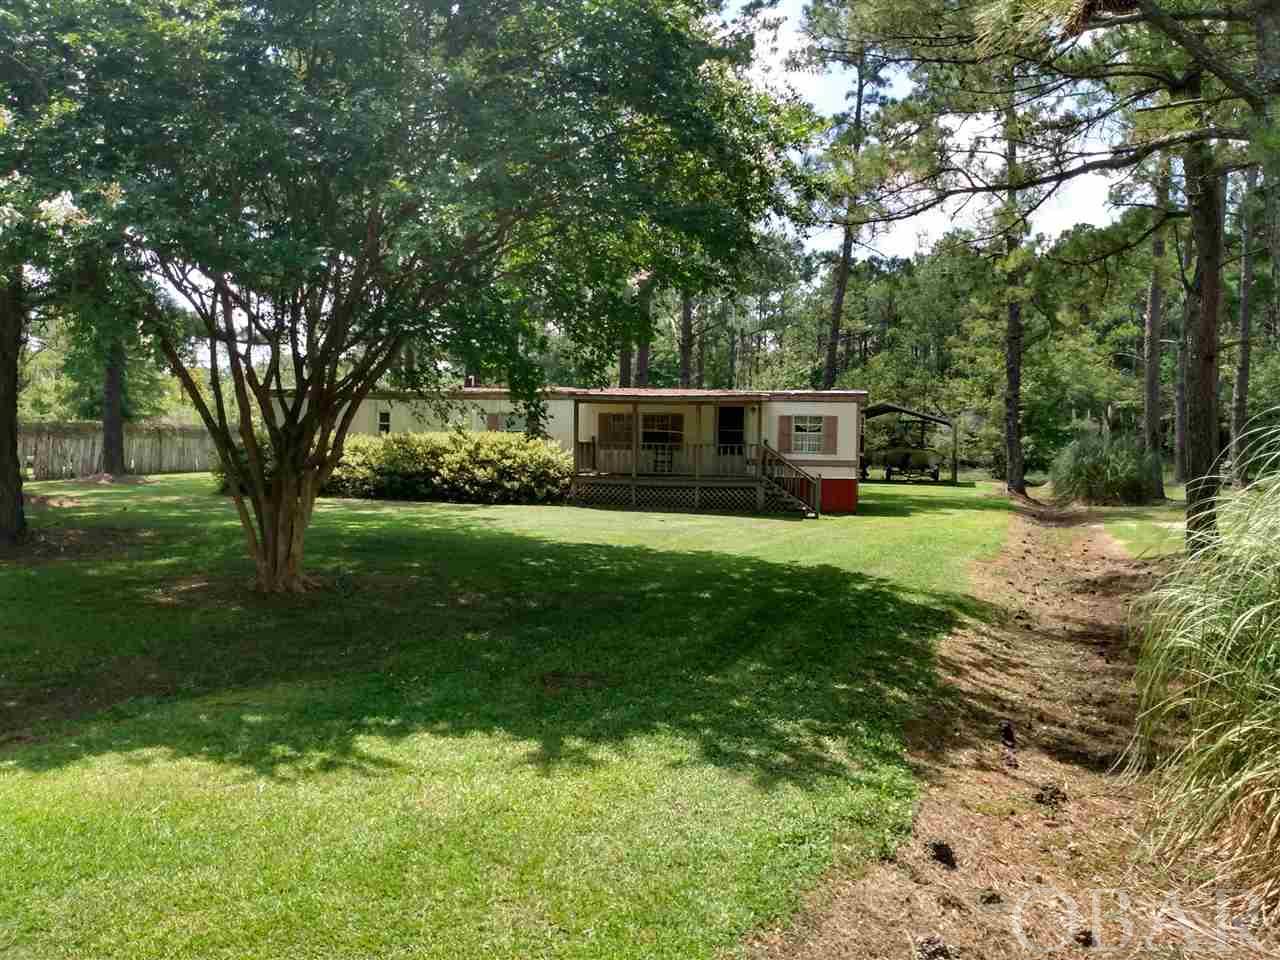 Nice mobile home on a spacious partially wooded lot. Set- up and ready to move in with appliances and furniture conveying. Large 20' X 27' detached metal shed idea for storing vehicles, boats, jet skis, lawn and garden equipment and supplies. Great property for a weekend stay or a stopping destination before the beach! Excellent place to take advantage of the abundant marine and wildlife resources in Tyrrell County, N.C. Priced to Sell! Cash offers only.